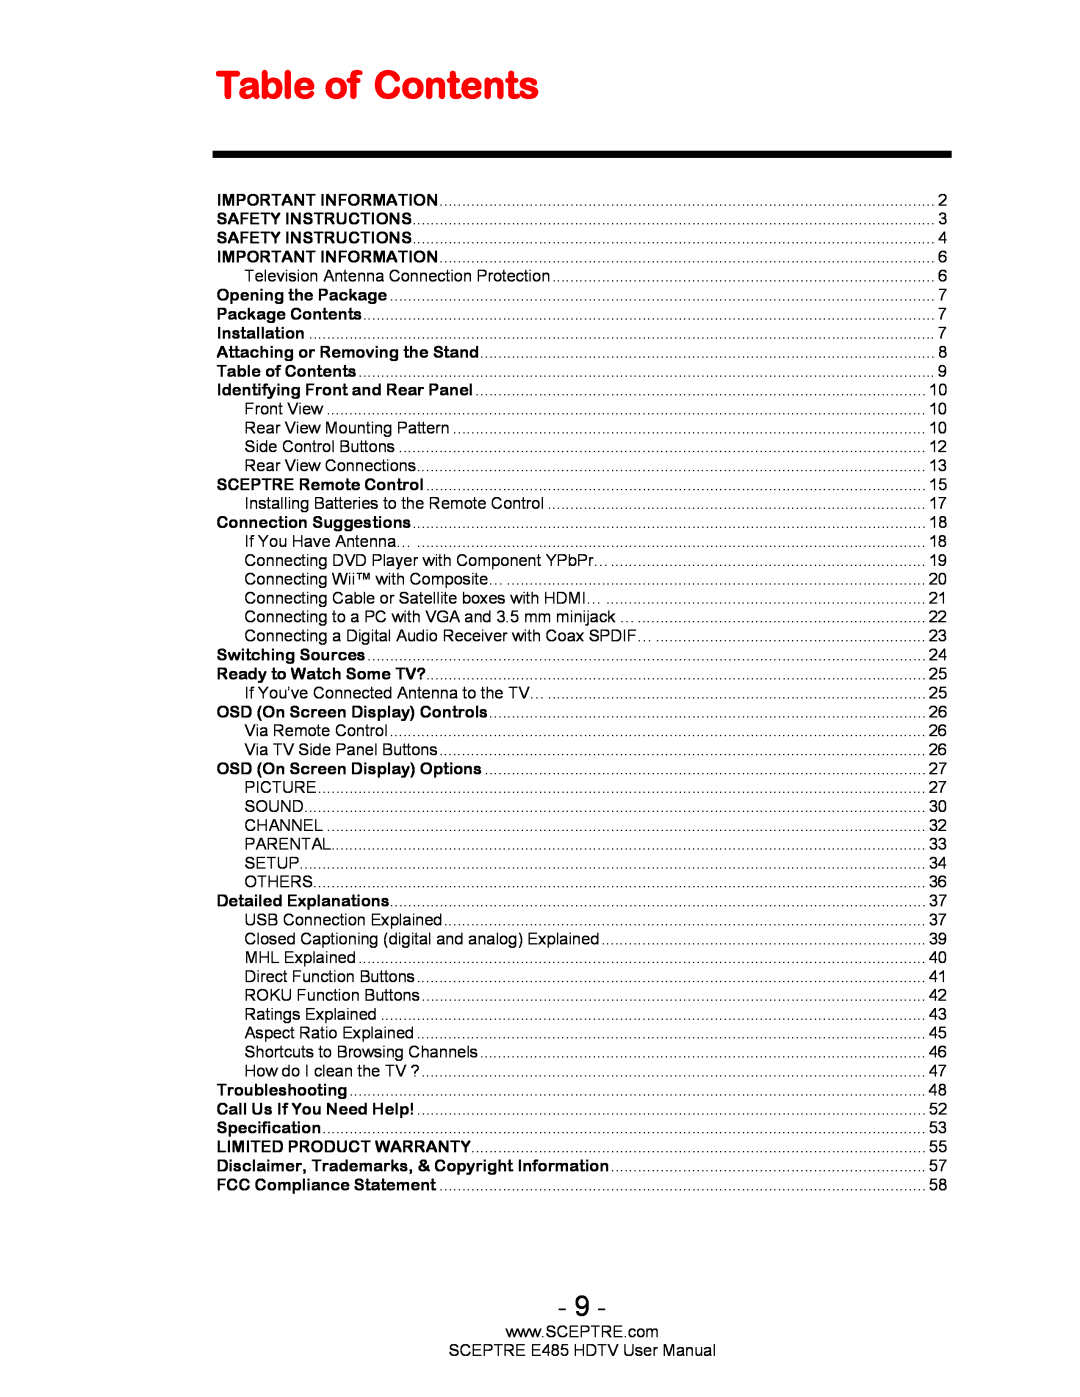 Sceptre Technologies E485 user manual Table of Contents, Disclaimer, Trademarks, & Copyright Information 